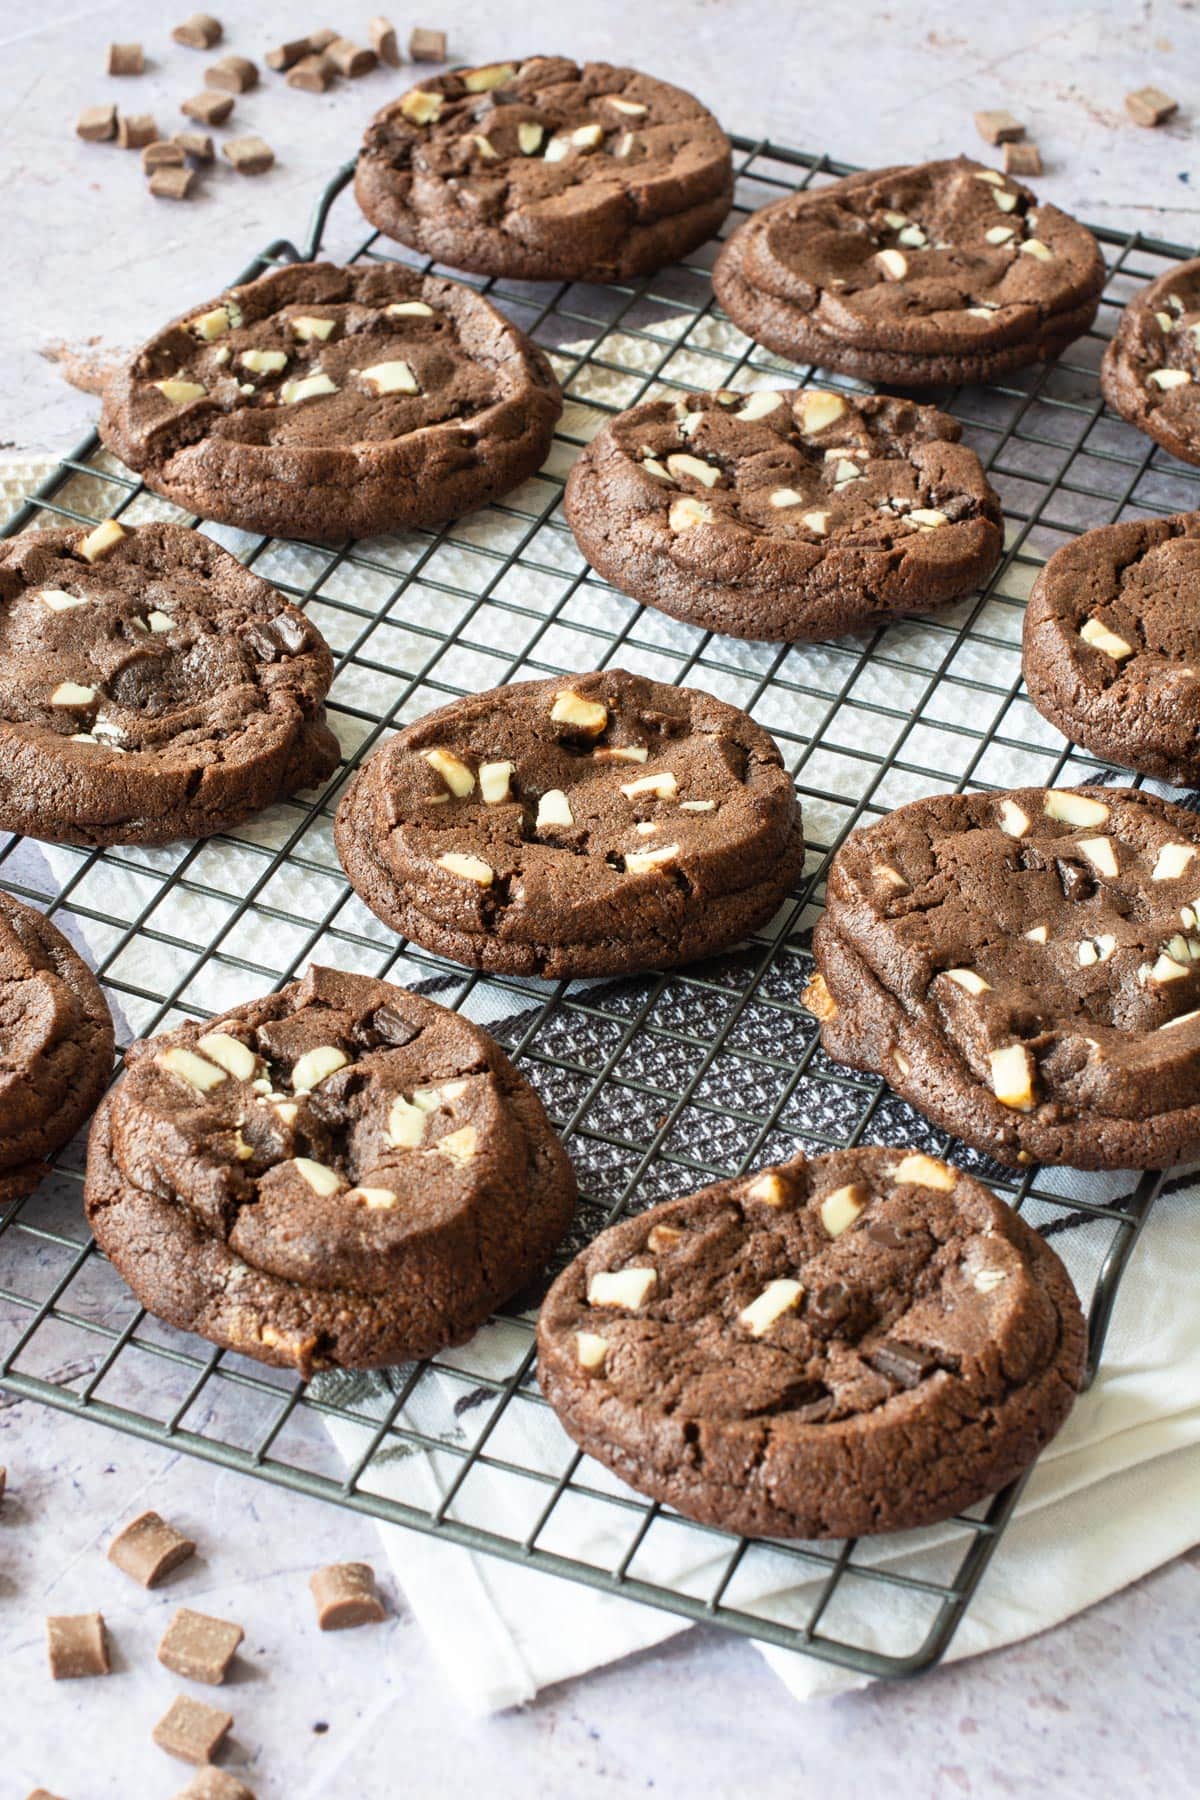 Triple Chocolate Cookies - The ultimate chocolate fix in biscuit form. Milk chocolate cookies with plenty of milk and dark chocolate chunks - Delicious!